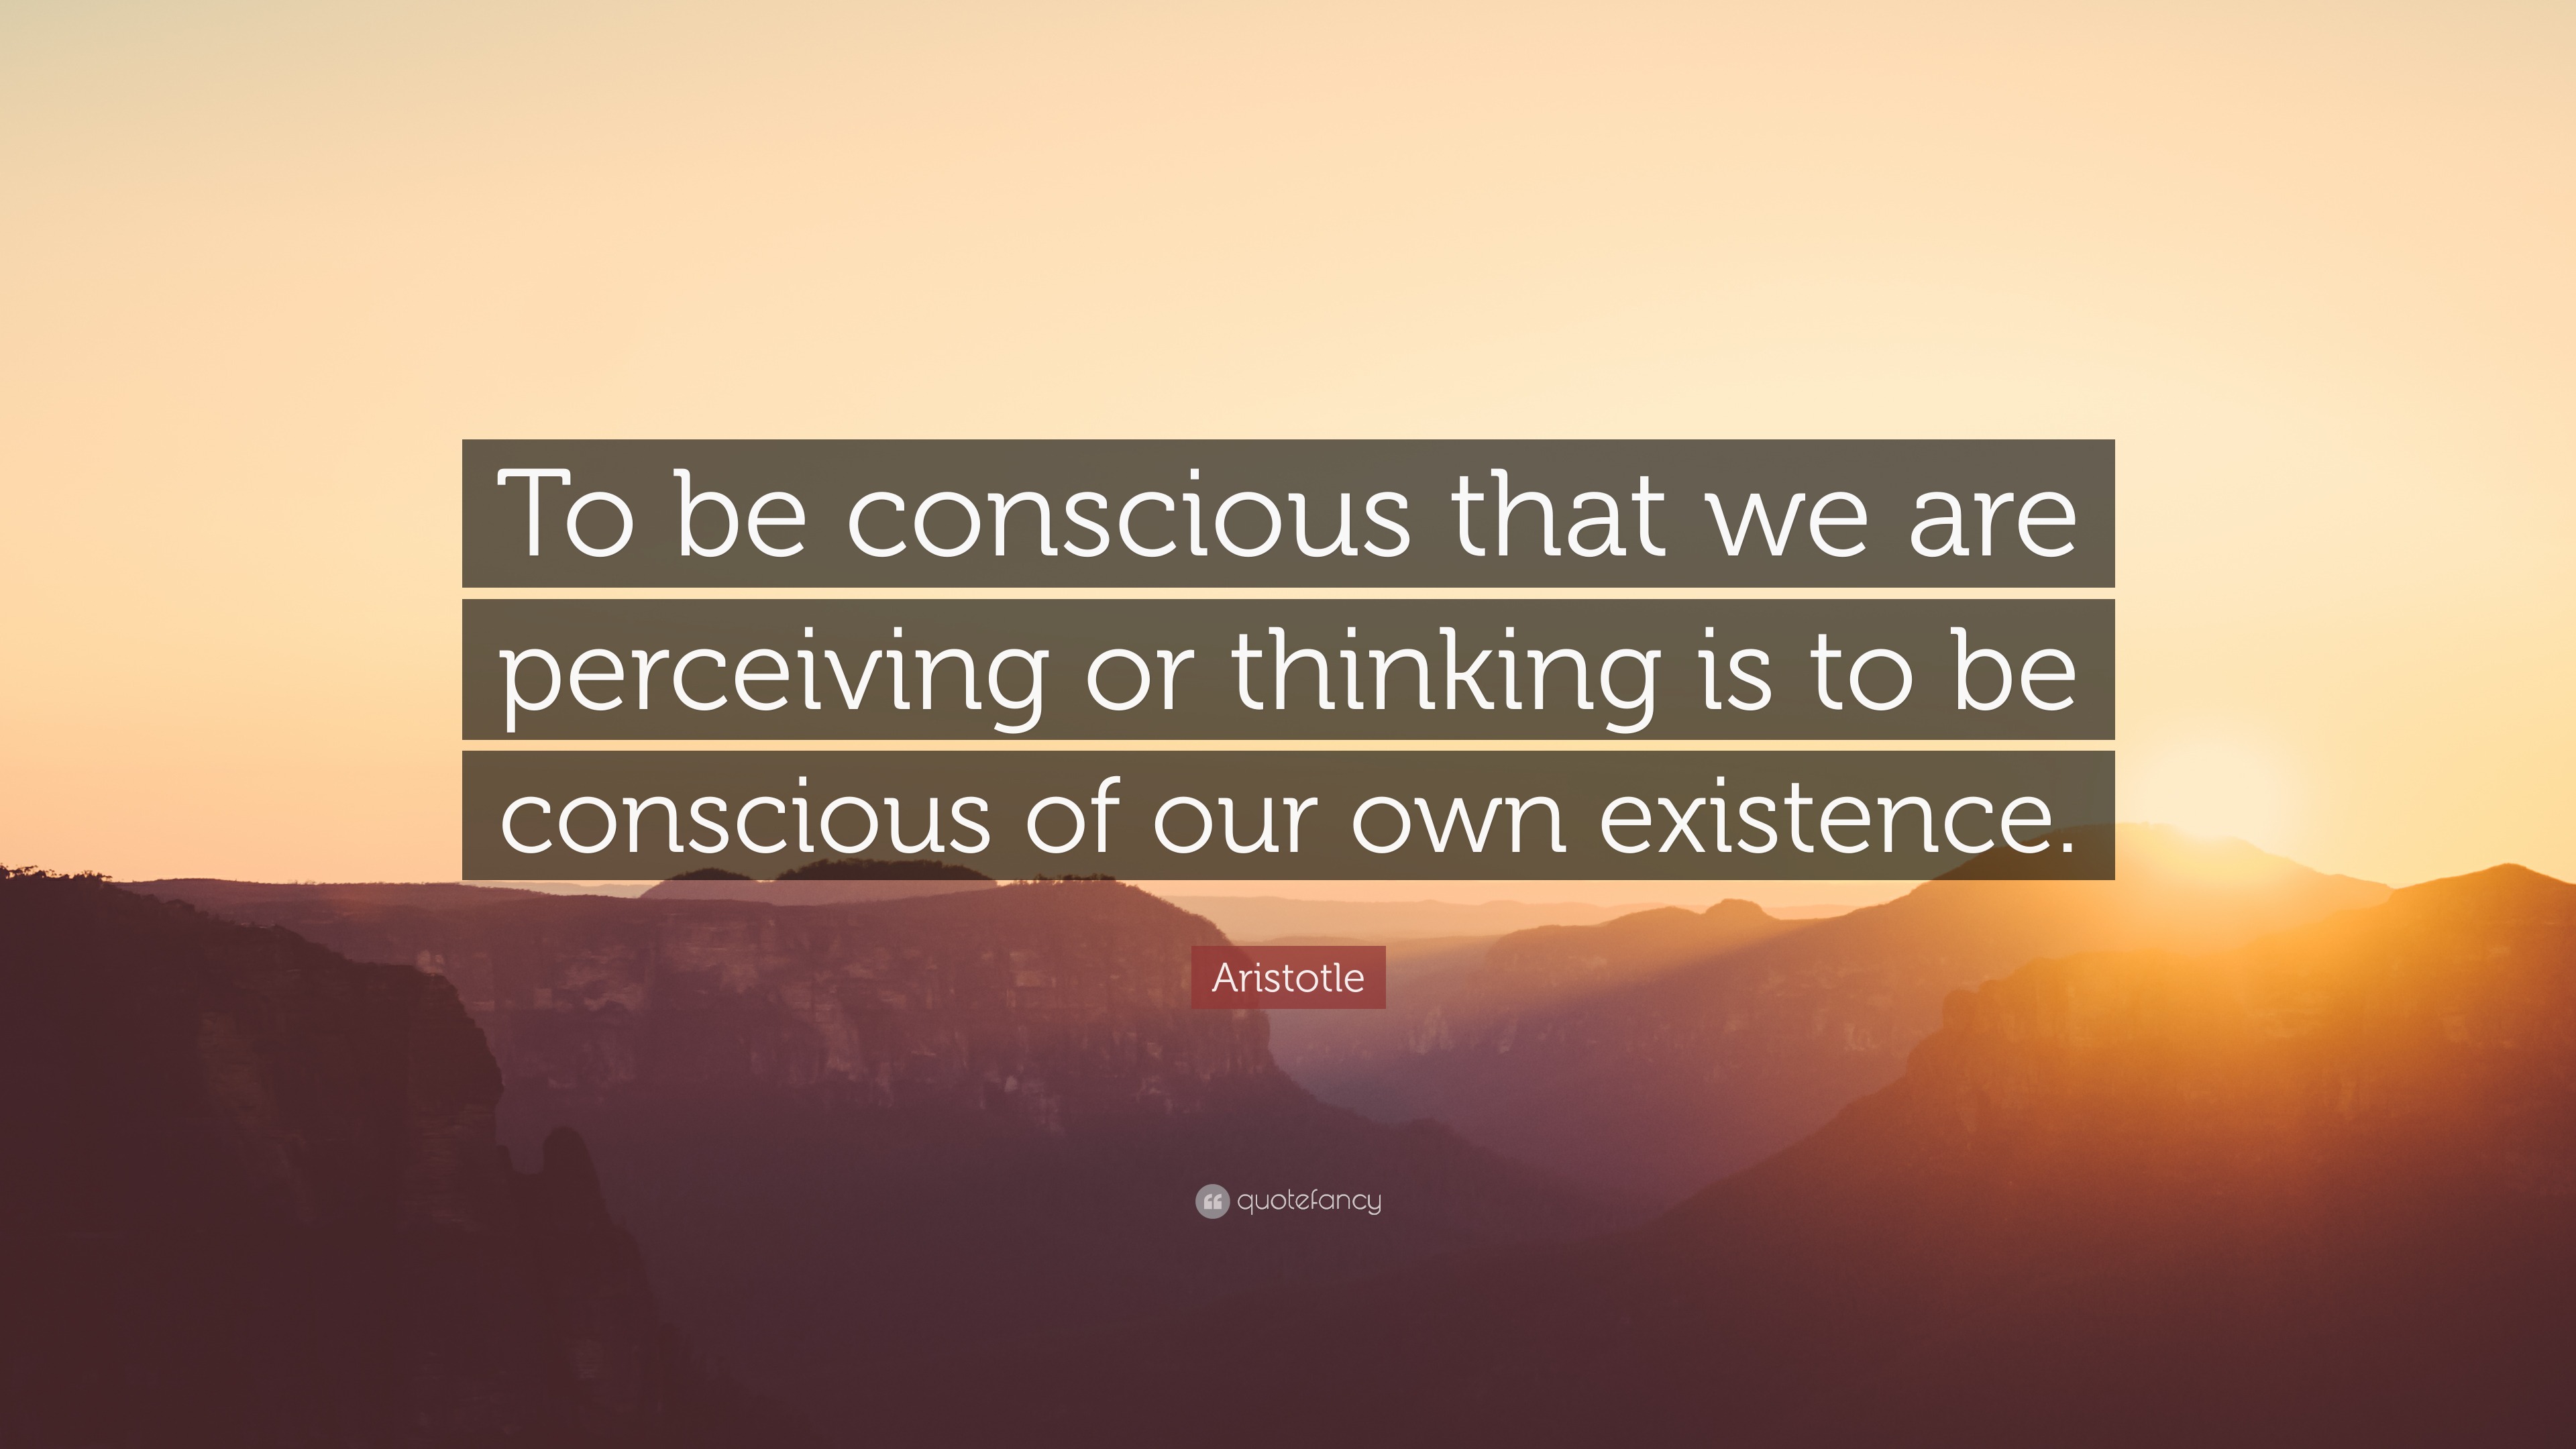 Aristotle Quote: “To be conscious that we are perceiving or thinking is ...